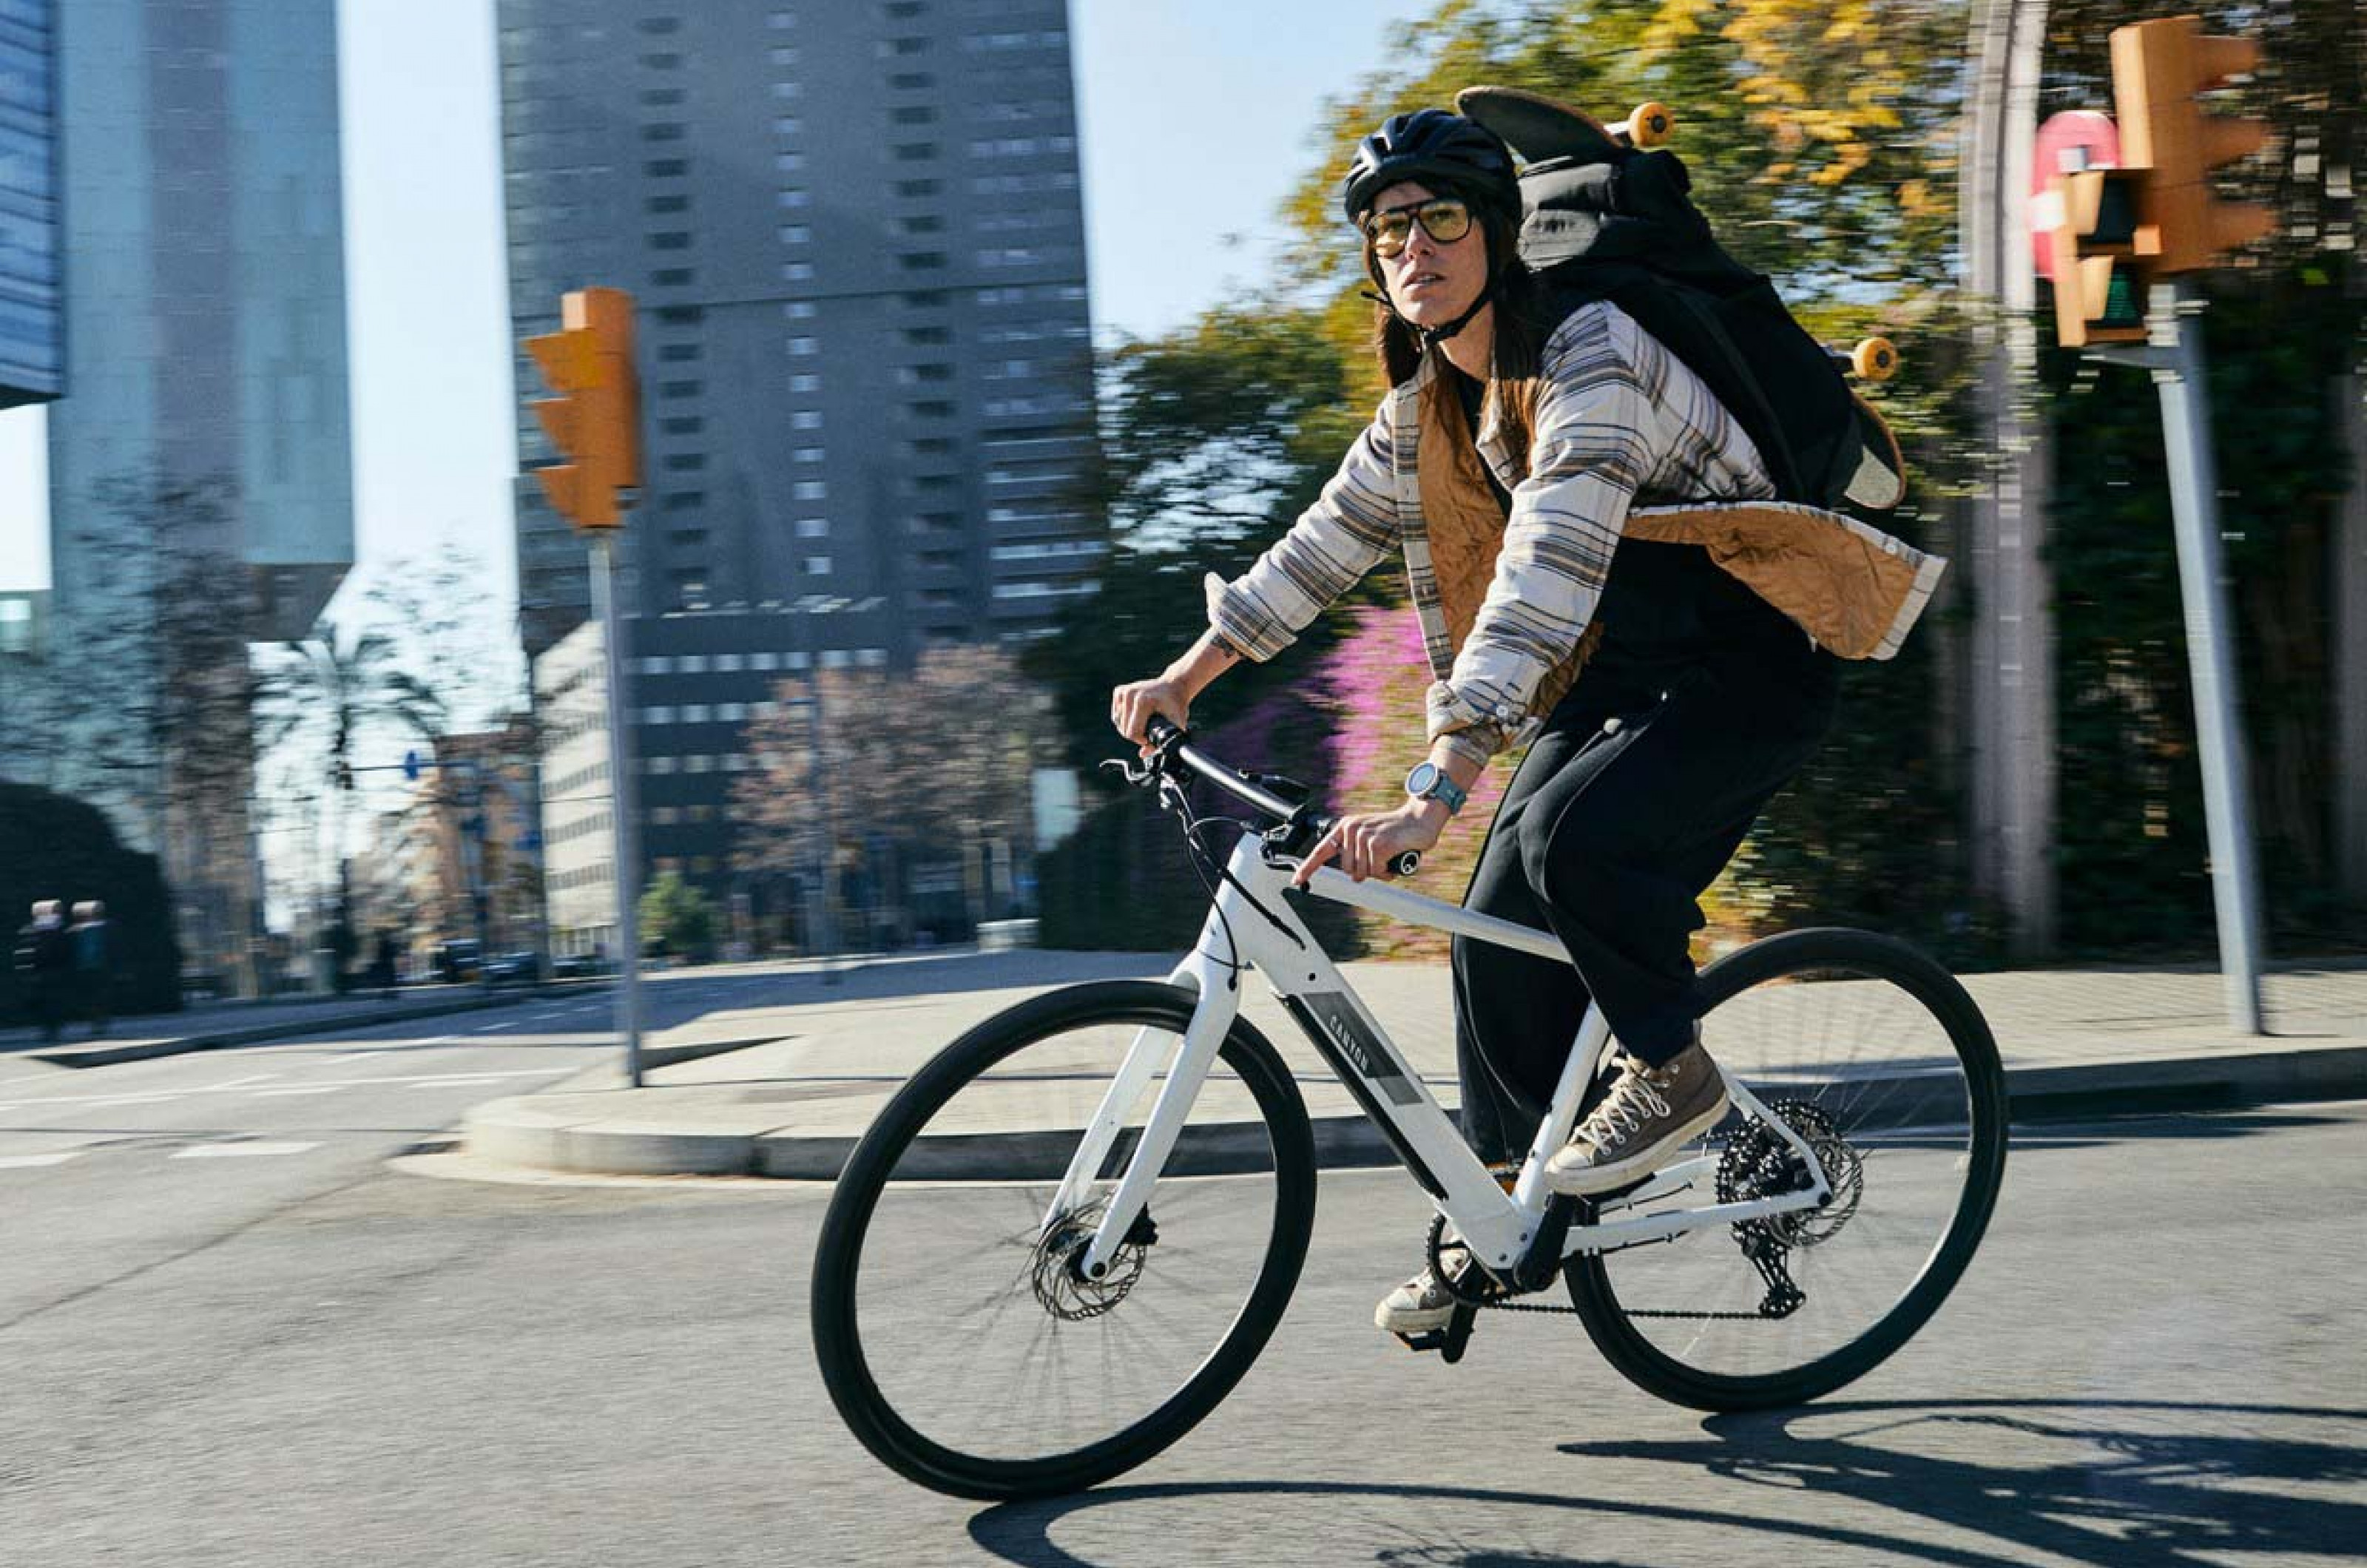 <p>If you’re looking for an e-bike that is both agile and fun to ride, then the Canyon Roadlite:ON 8 might be the two-wheeler for you. Like the Ribble and Volt, the Roadlite has been designed for urban riding, and yet it has the capabilities to be ridden for miles in the countryside. It uses the latest Fazua motor which offers good range and power. </p>